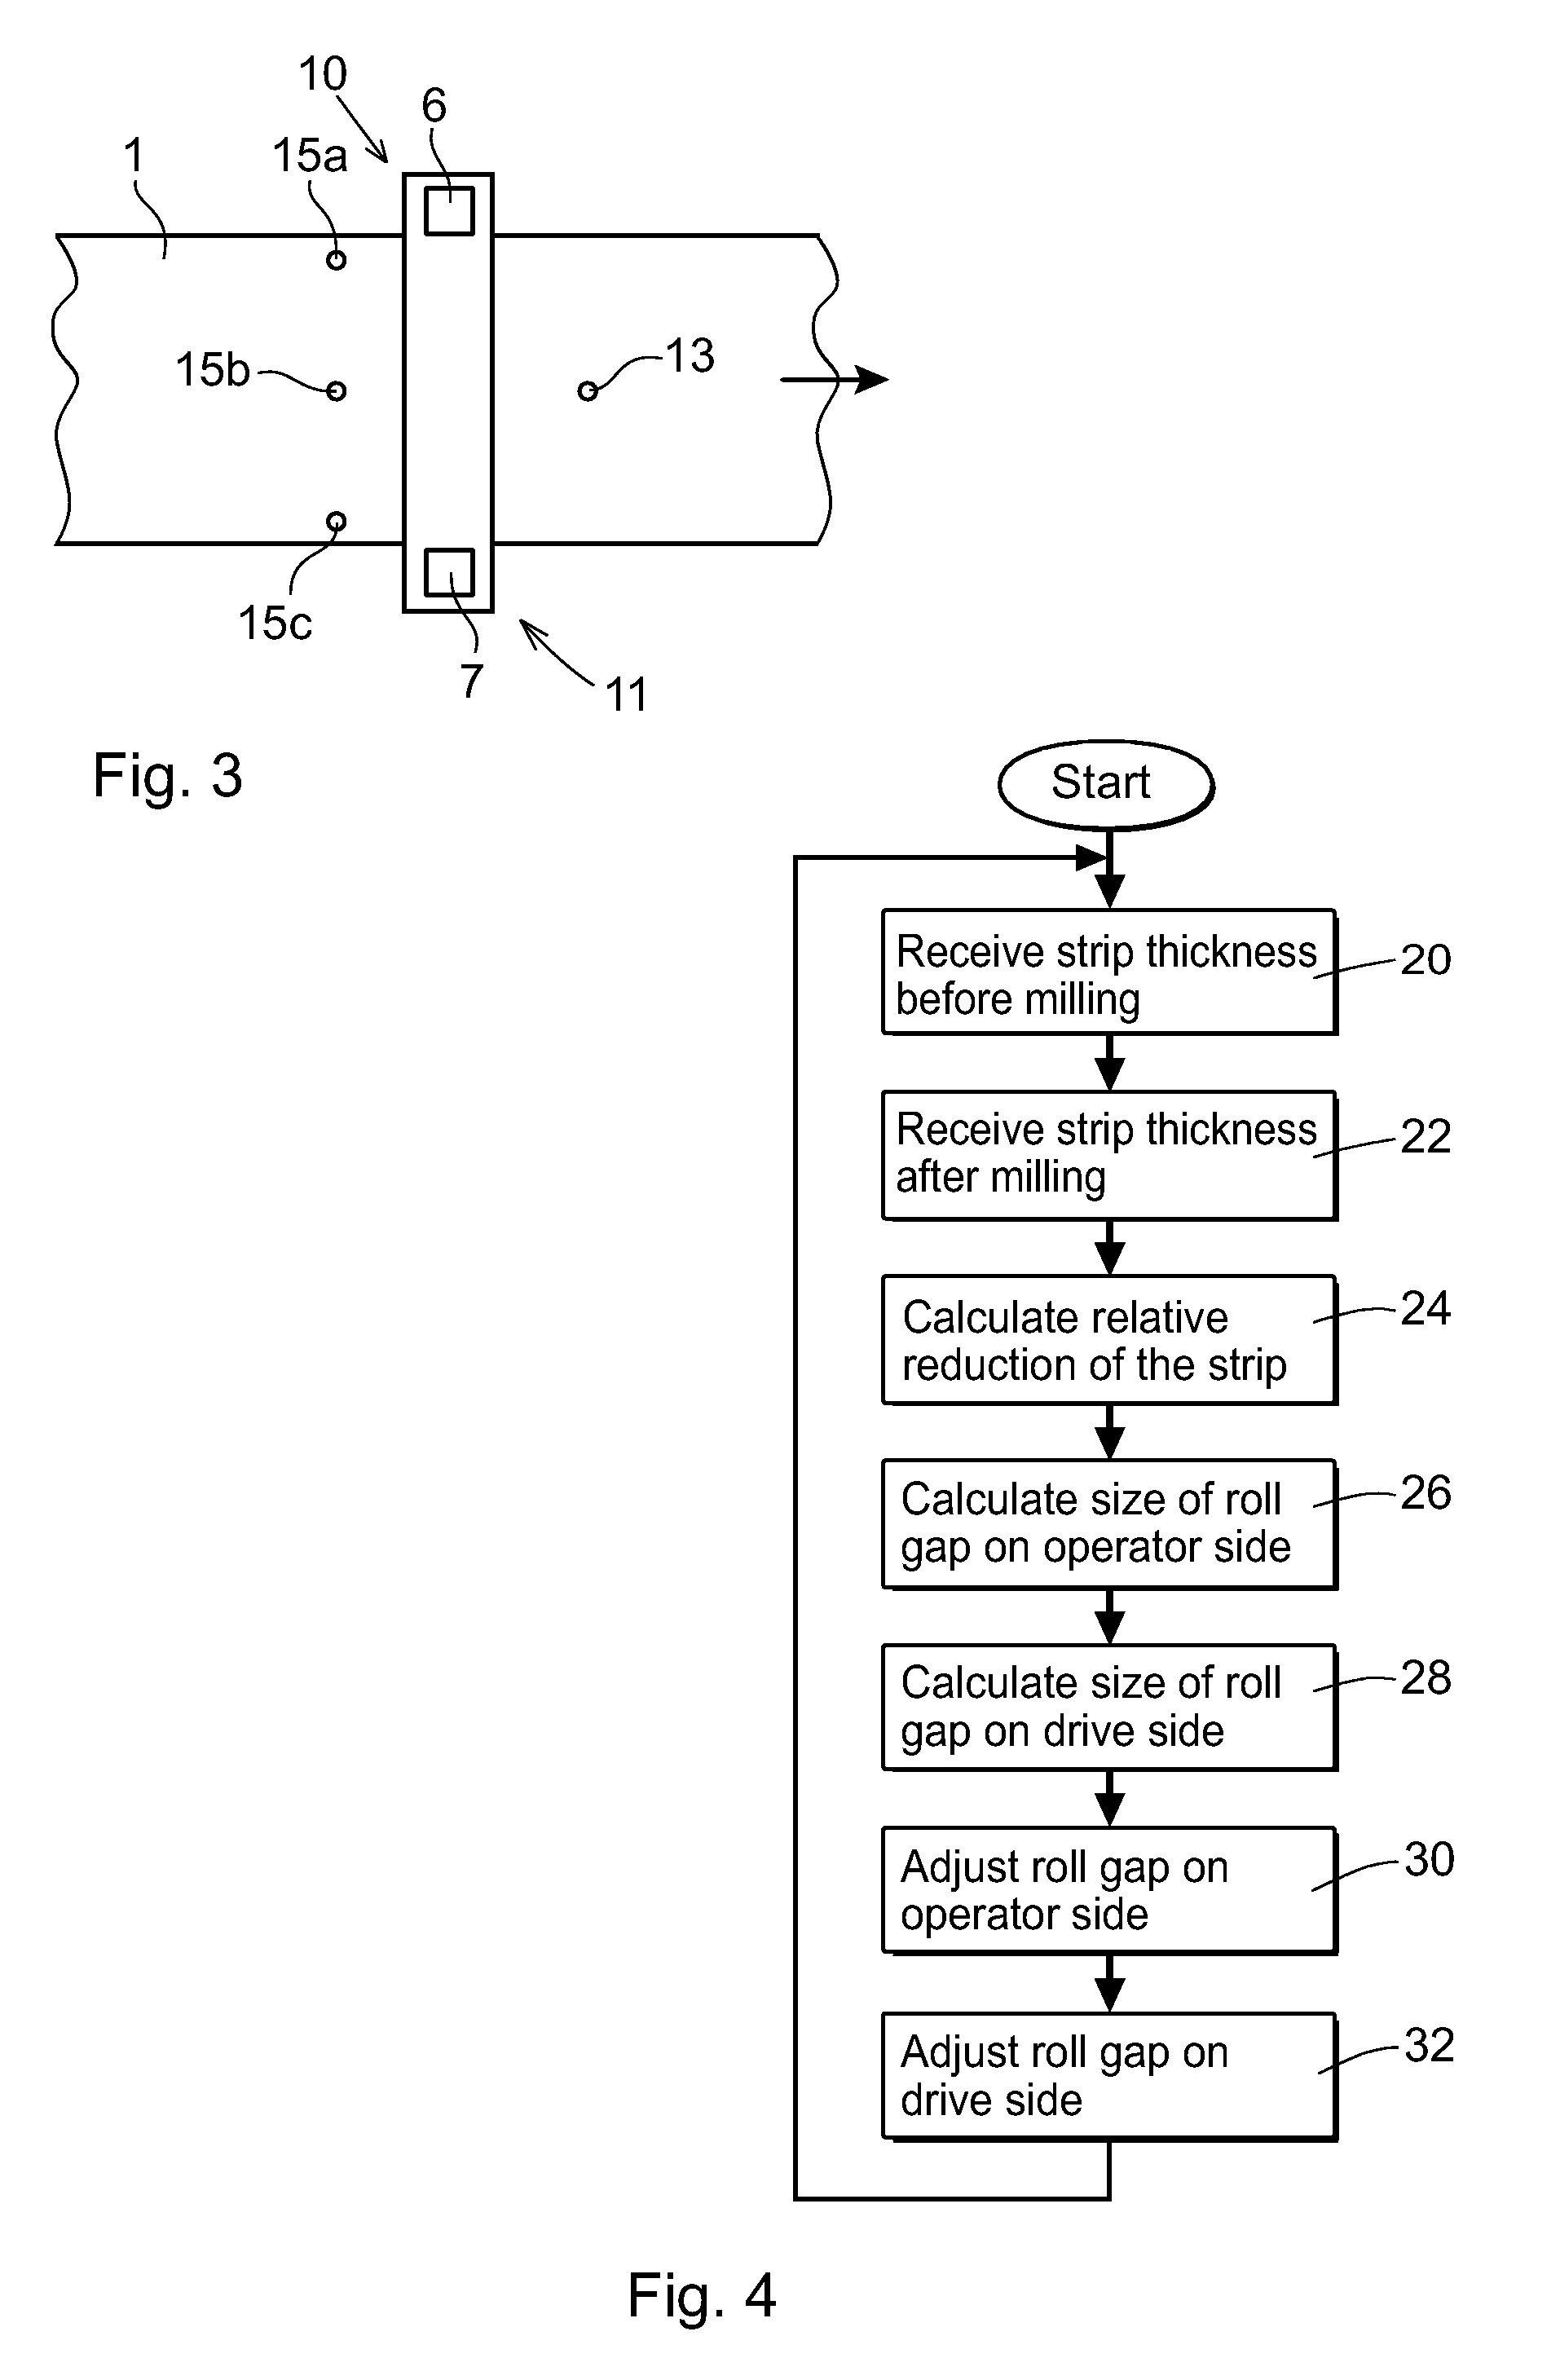 Method and device for controlling a roll gap